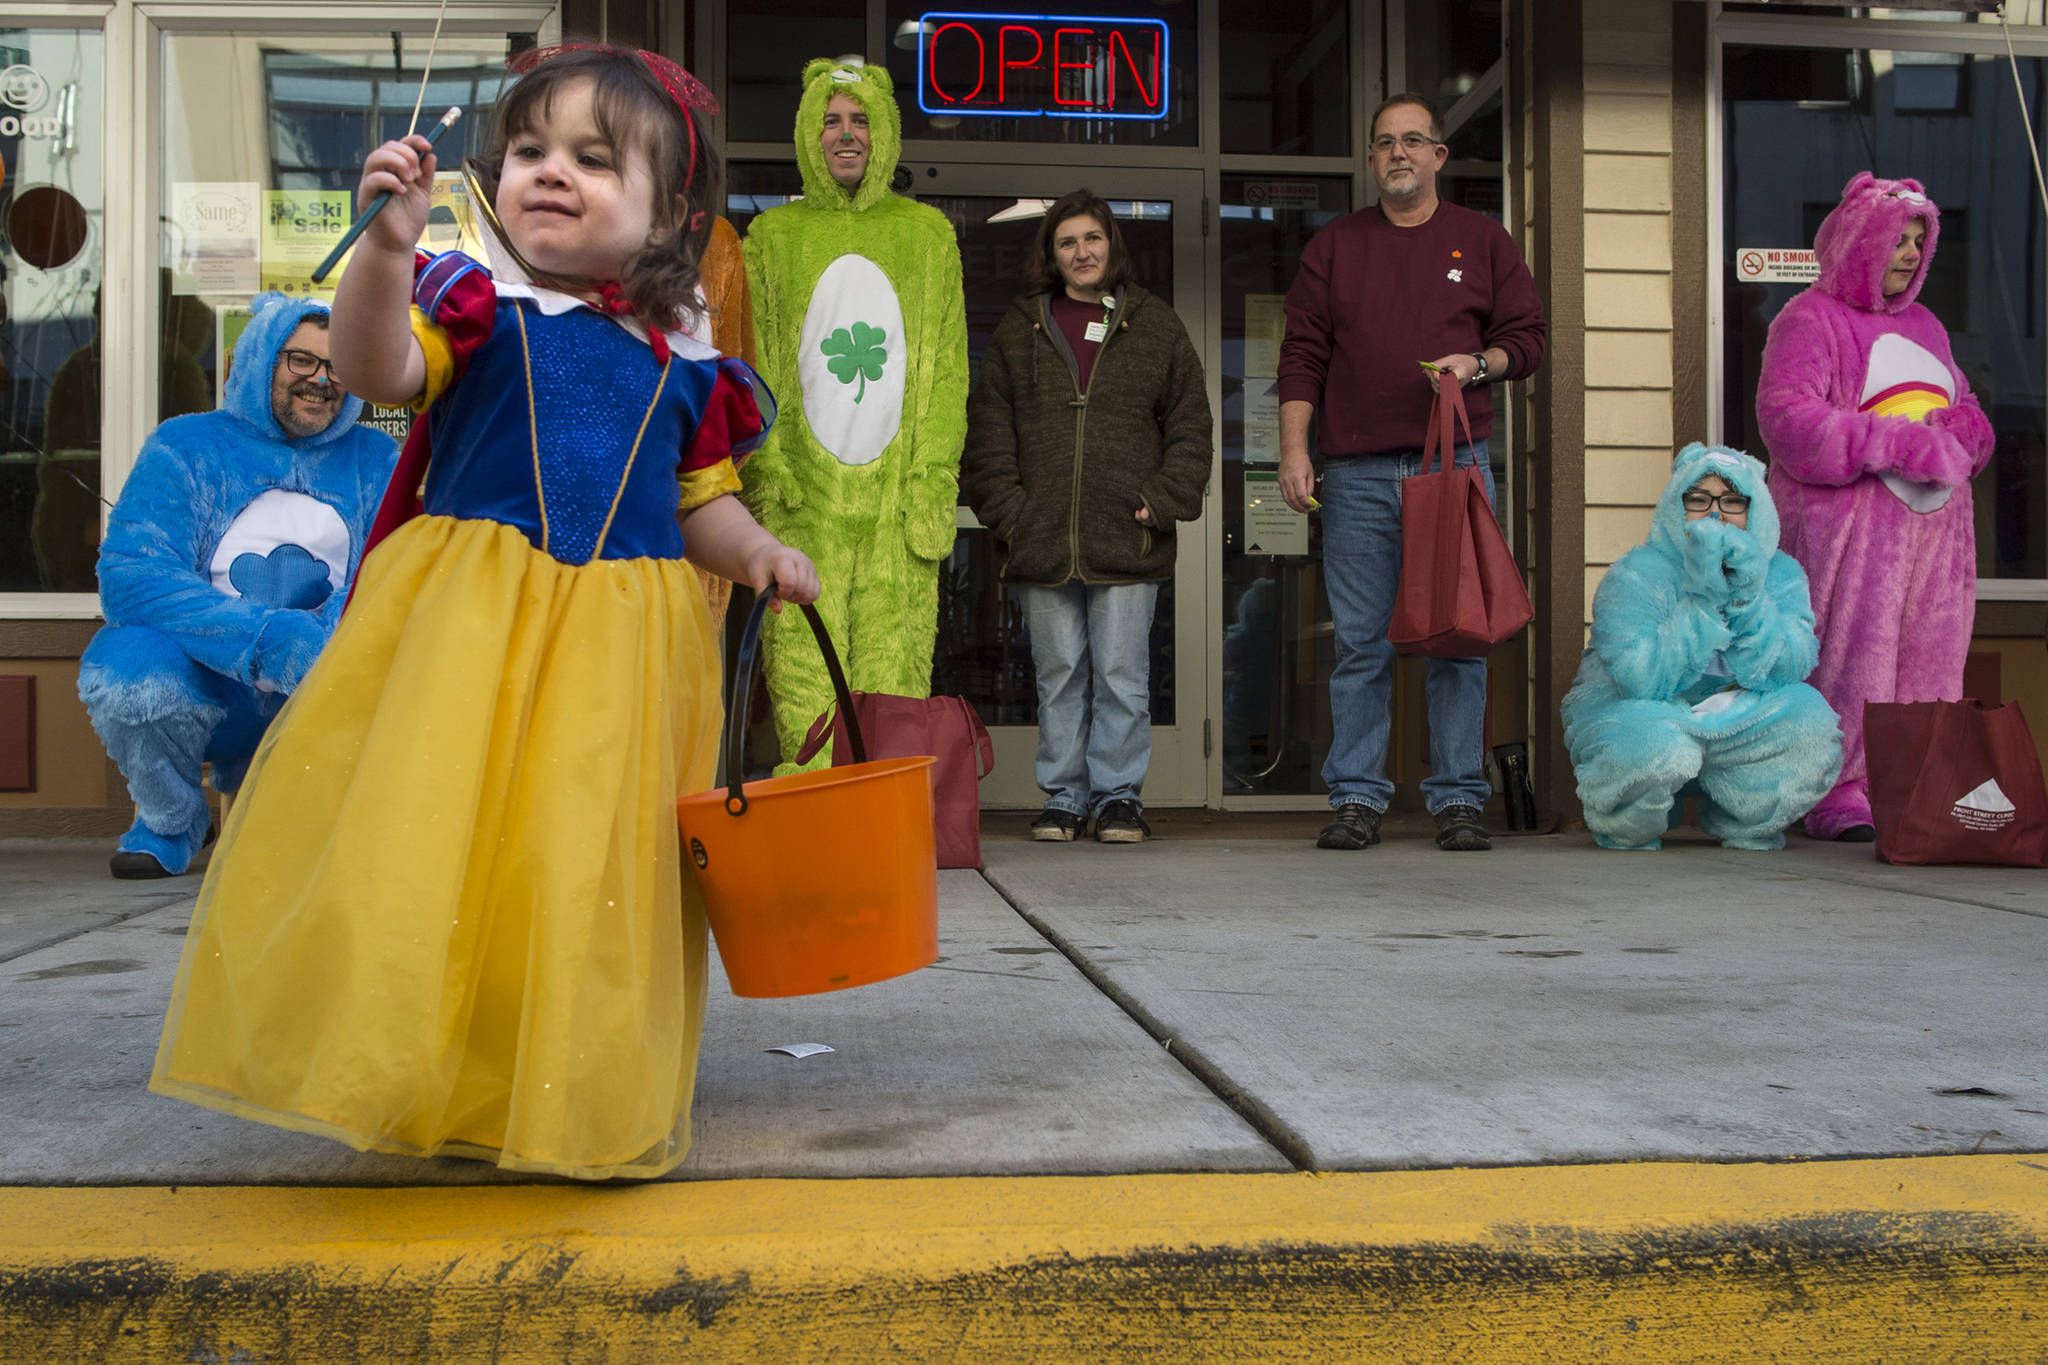 Weekend Guide: Trick or treating, pumpkin smashing and so much more